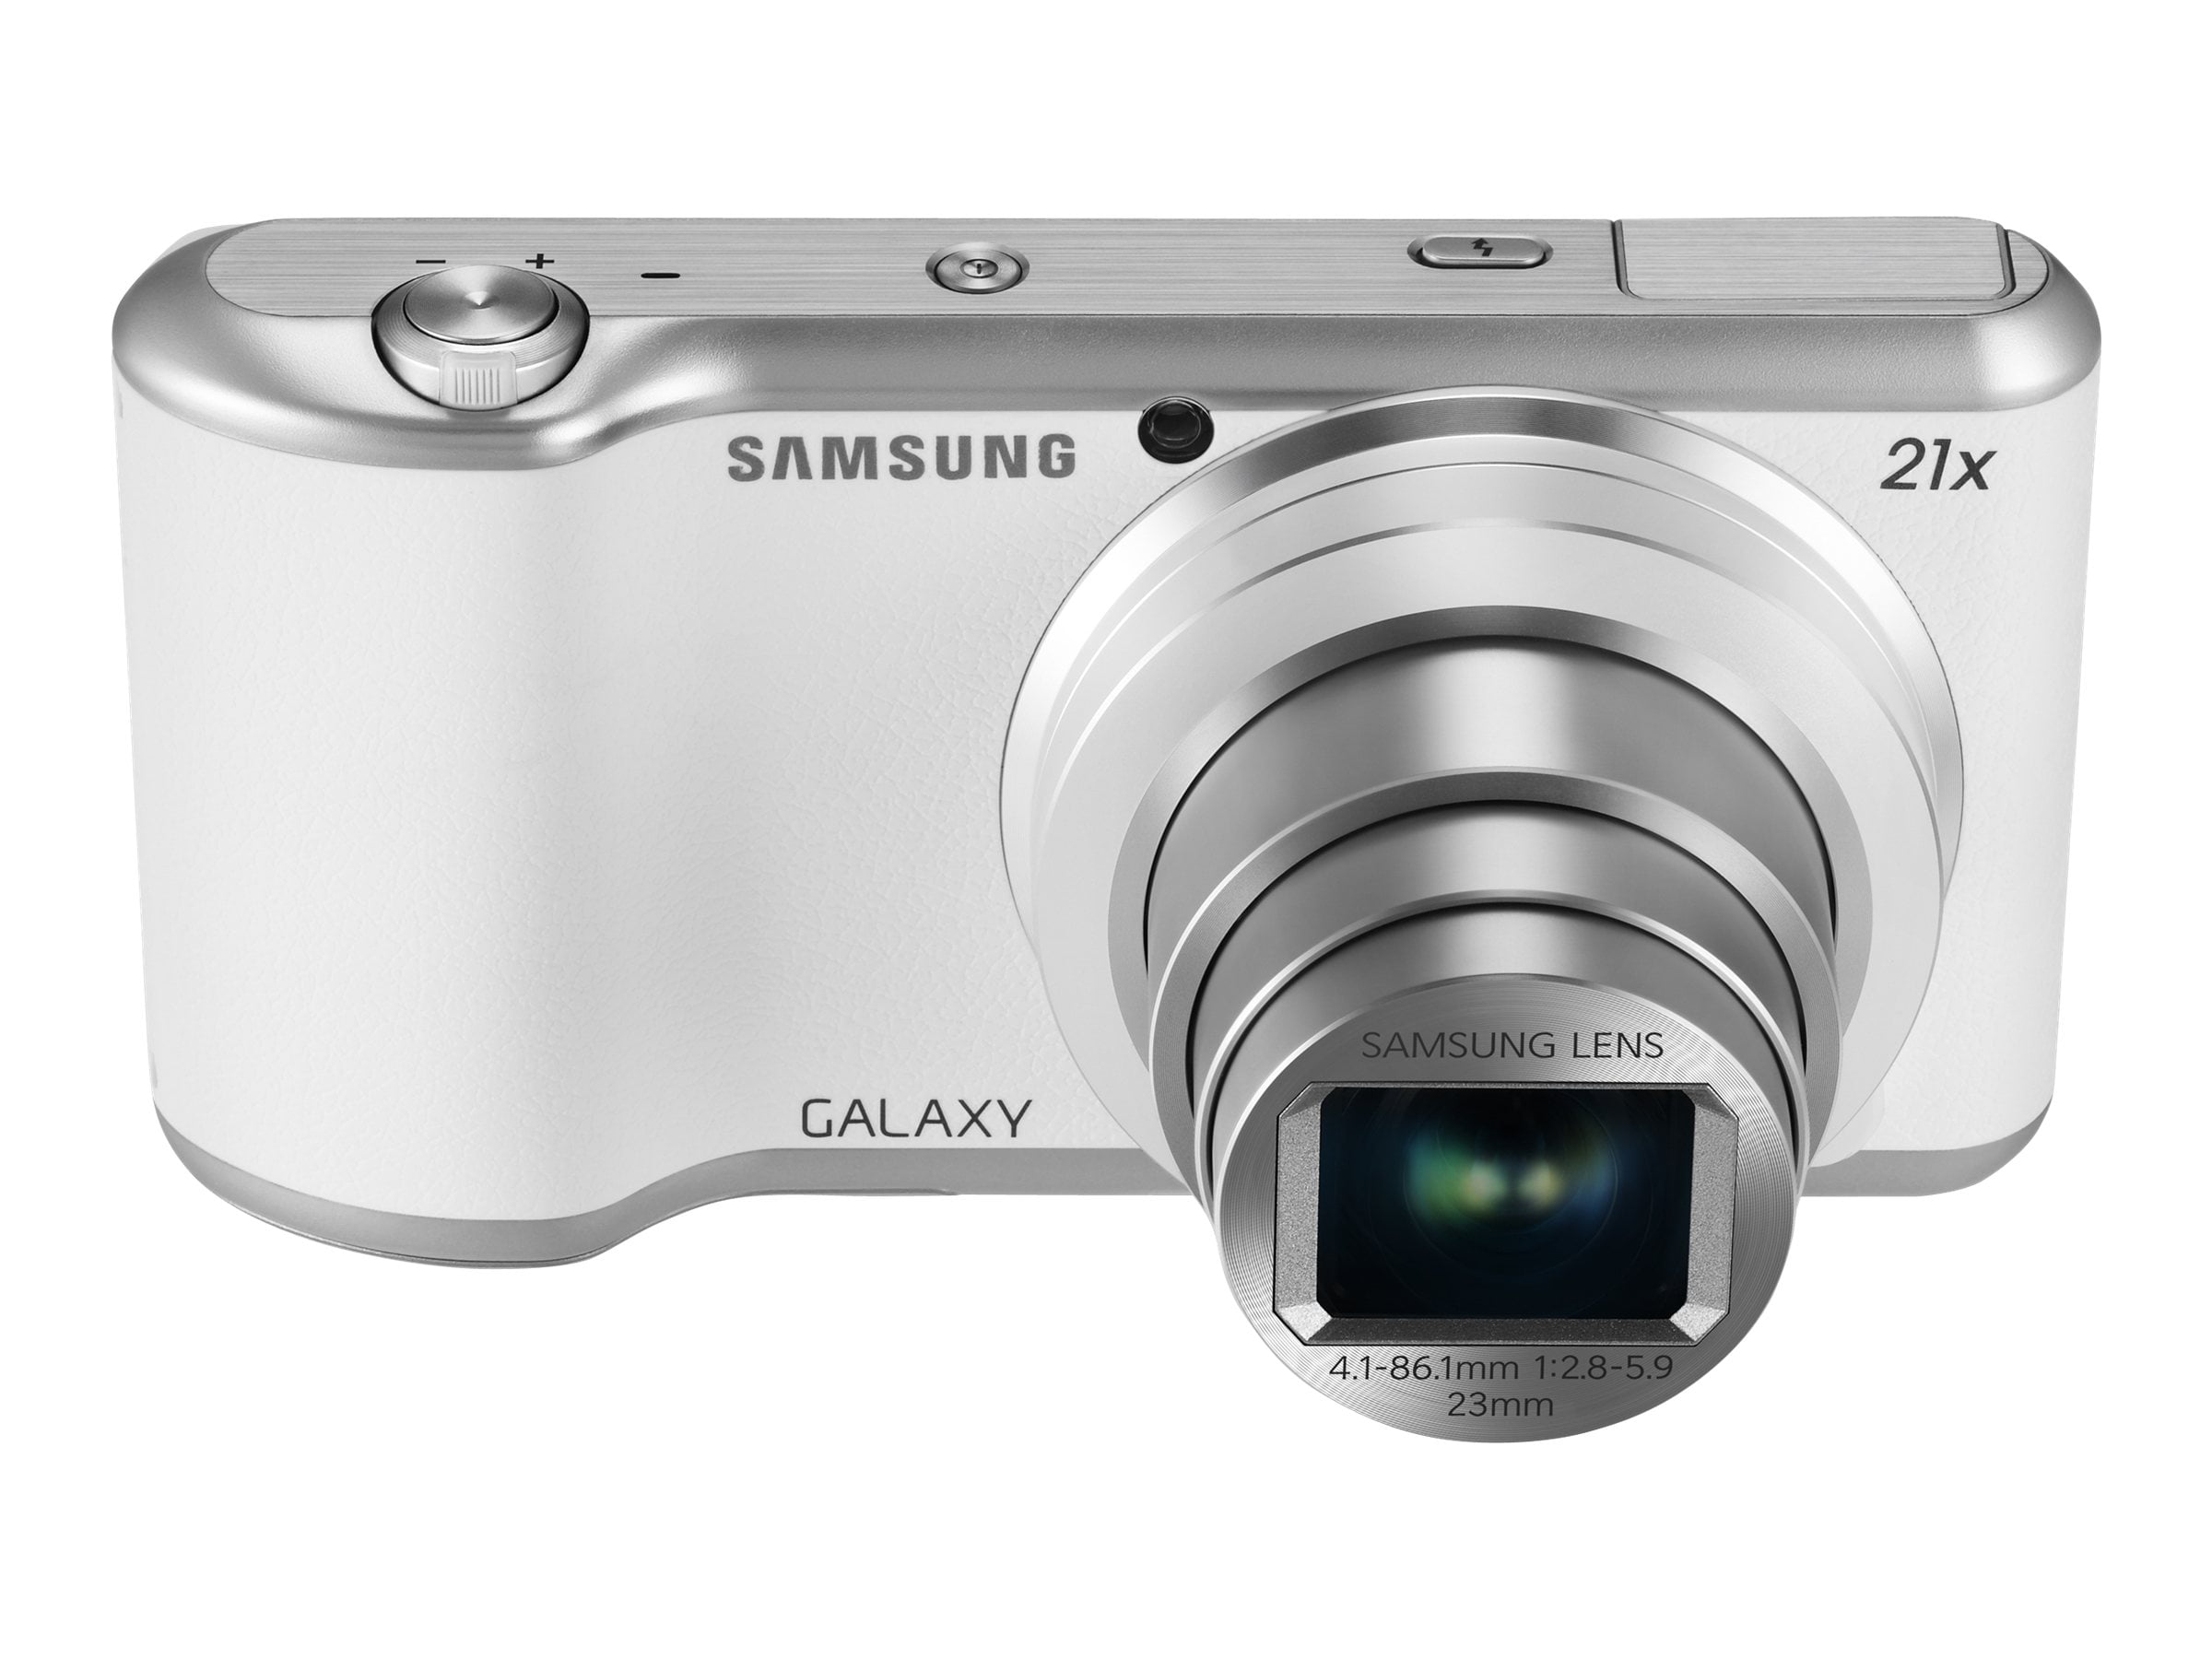  A white Samsung Galaxy camera with the lens extended and the flash open.